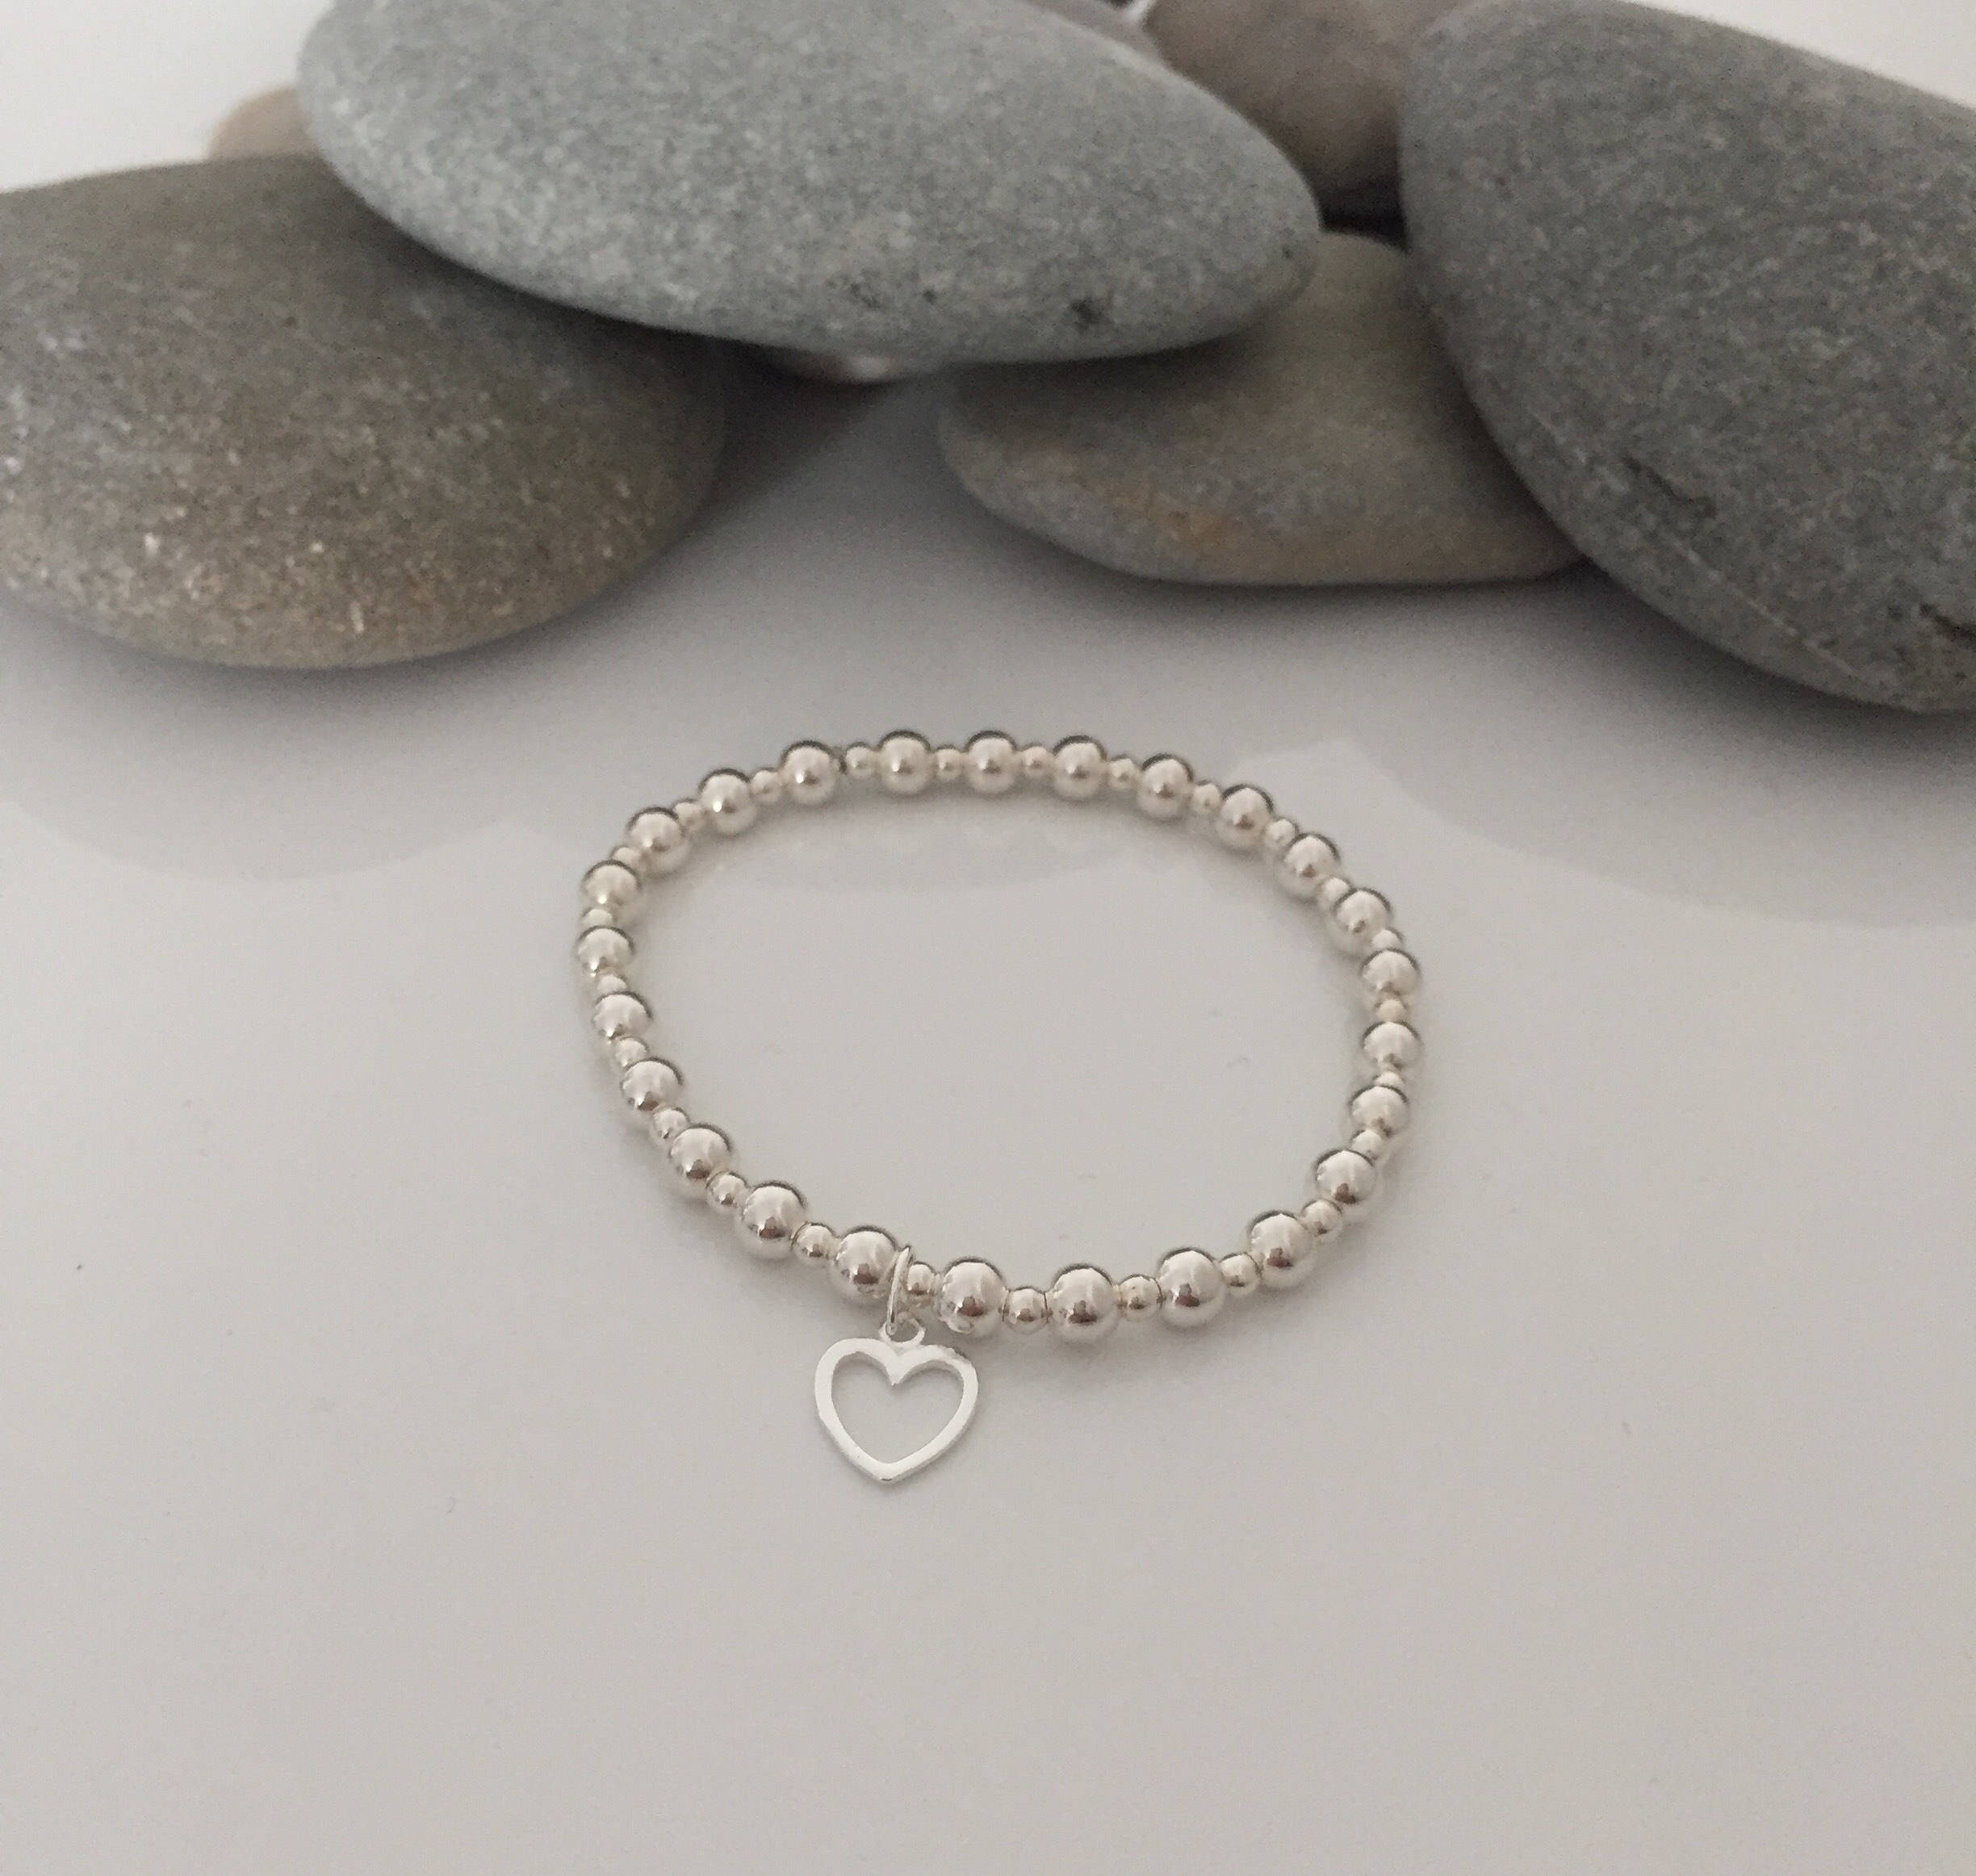 sterling silver stretch bracelet with sterling silver heart charm 5e4571a8